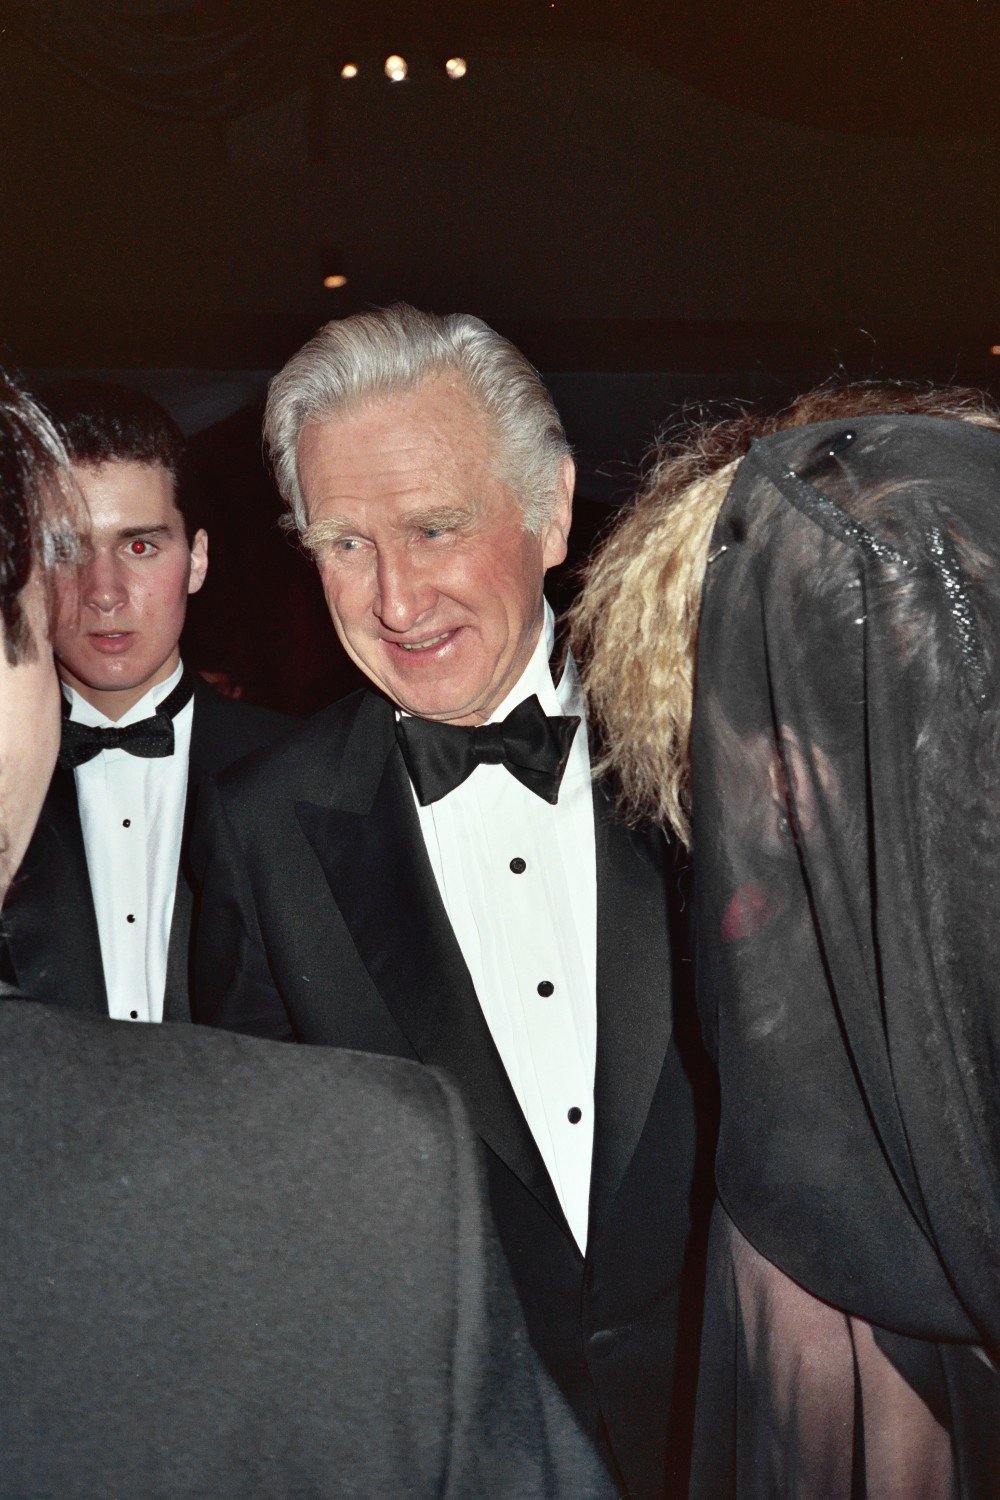 two men in tuxedos are talking to one another